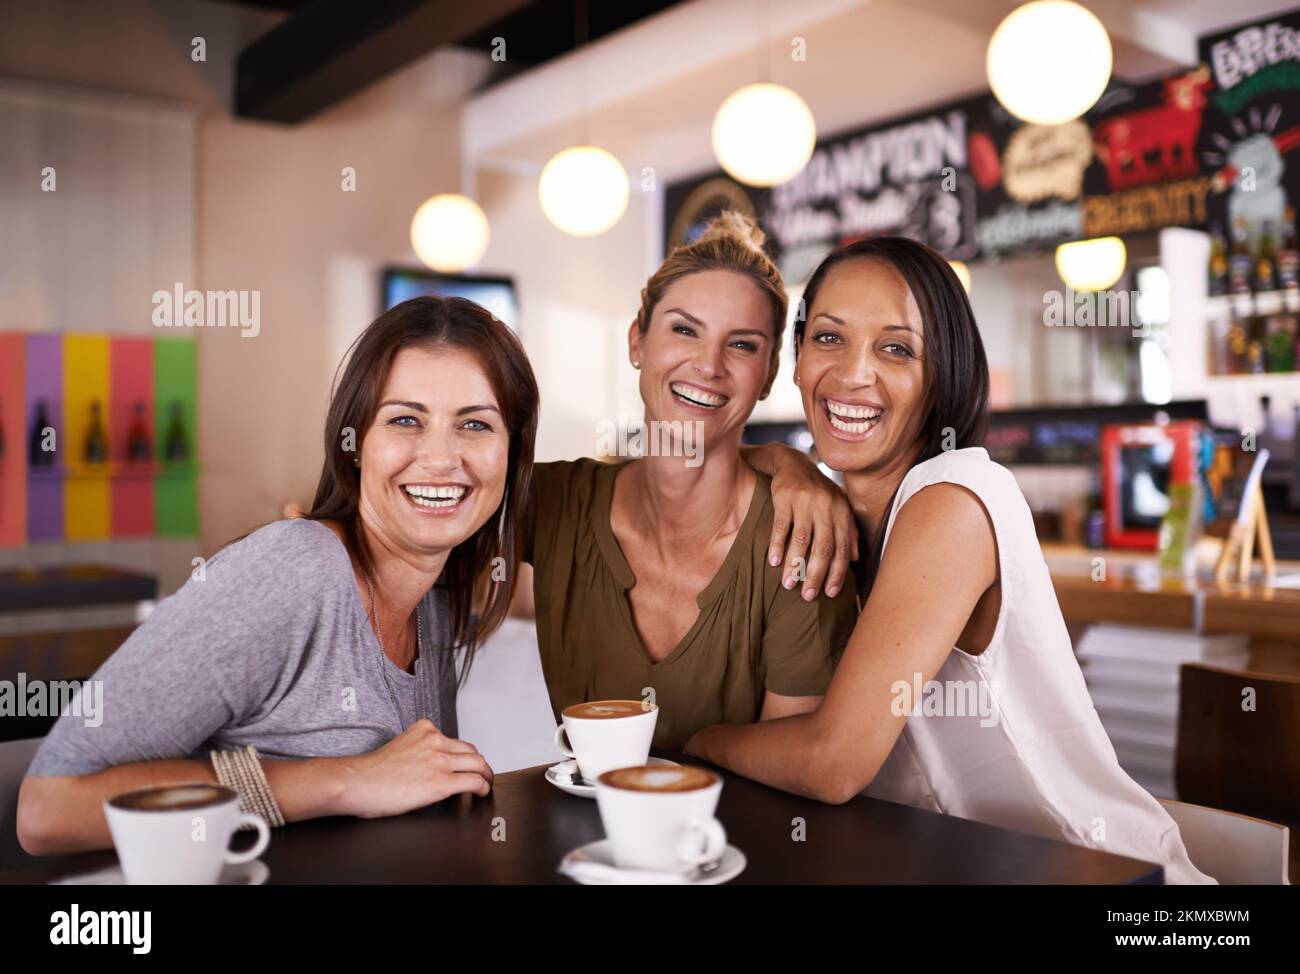 Fun with their besties. Portrait of three friends having fun at a coffee shop together. Stock Photo